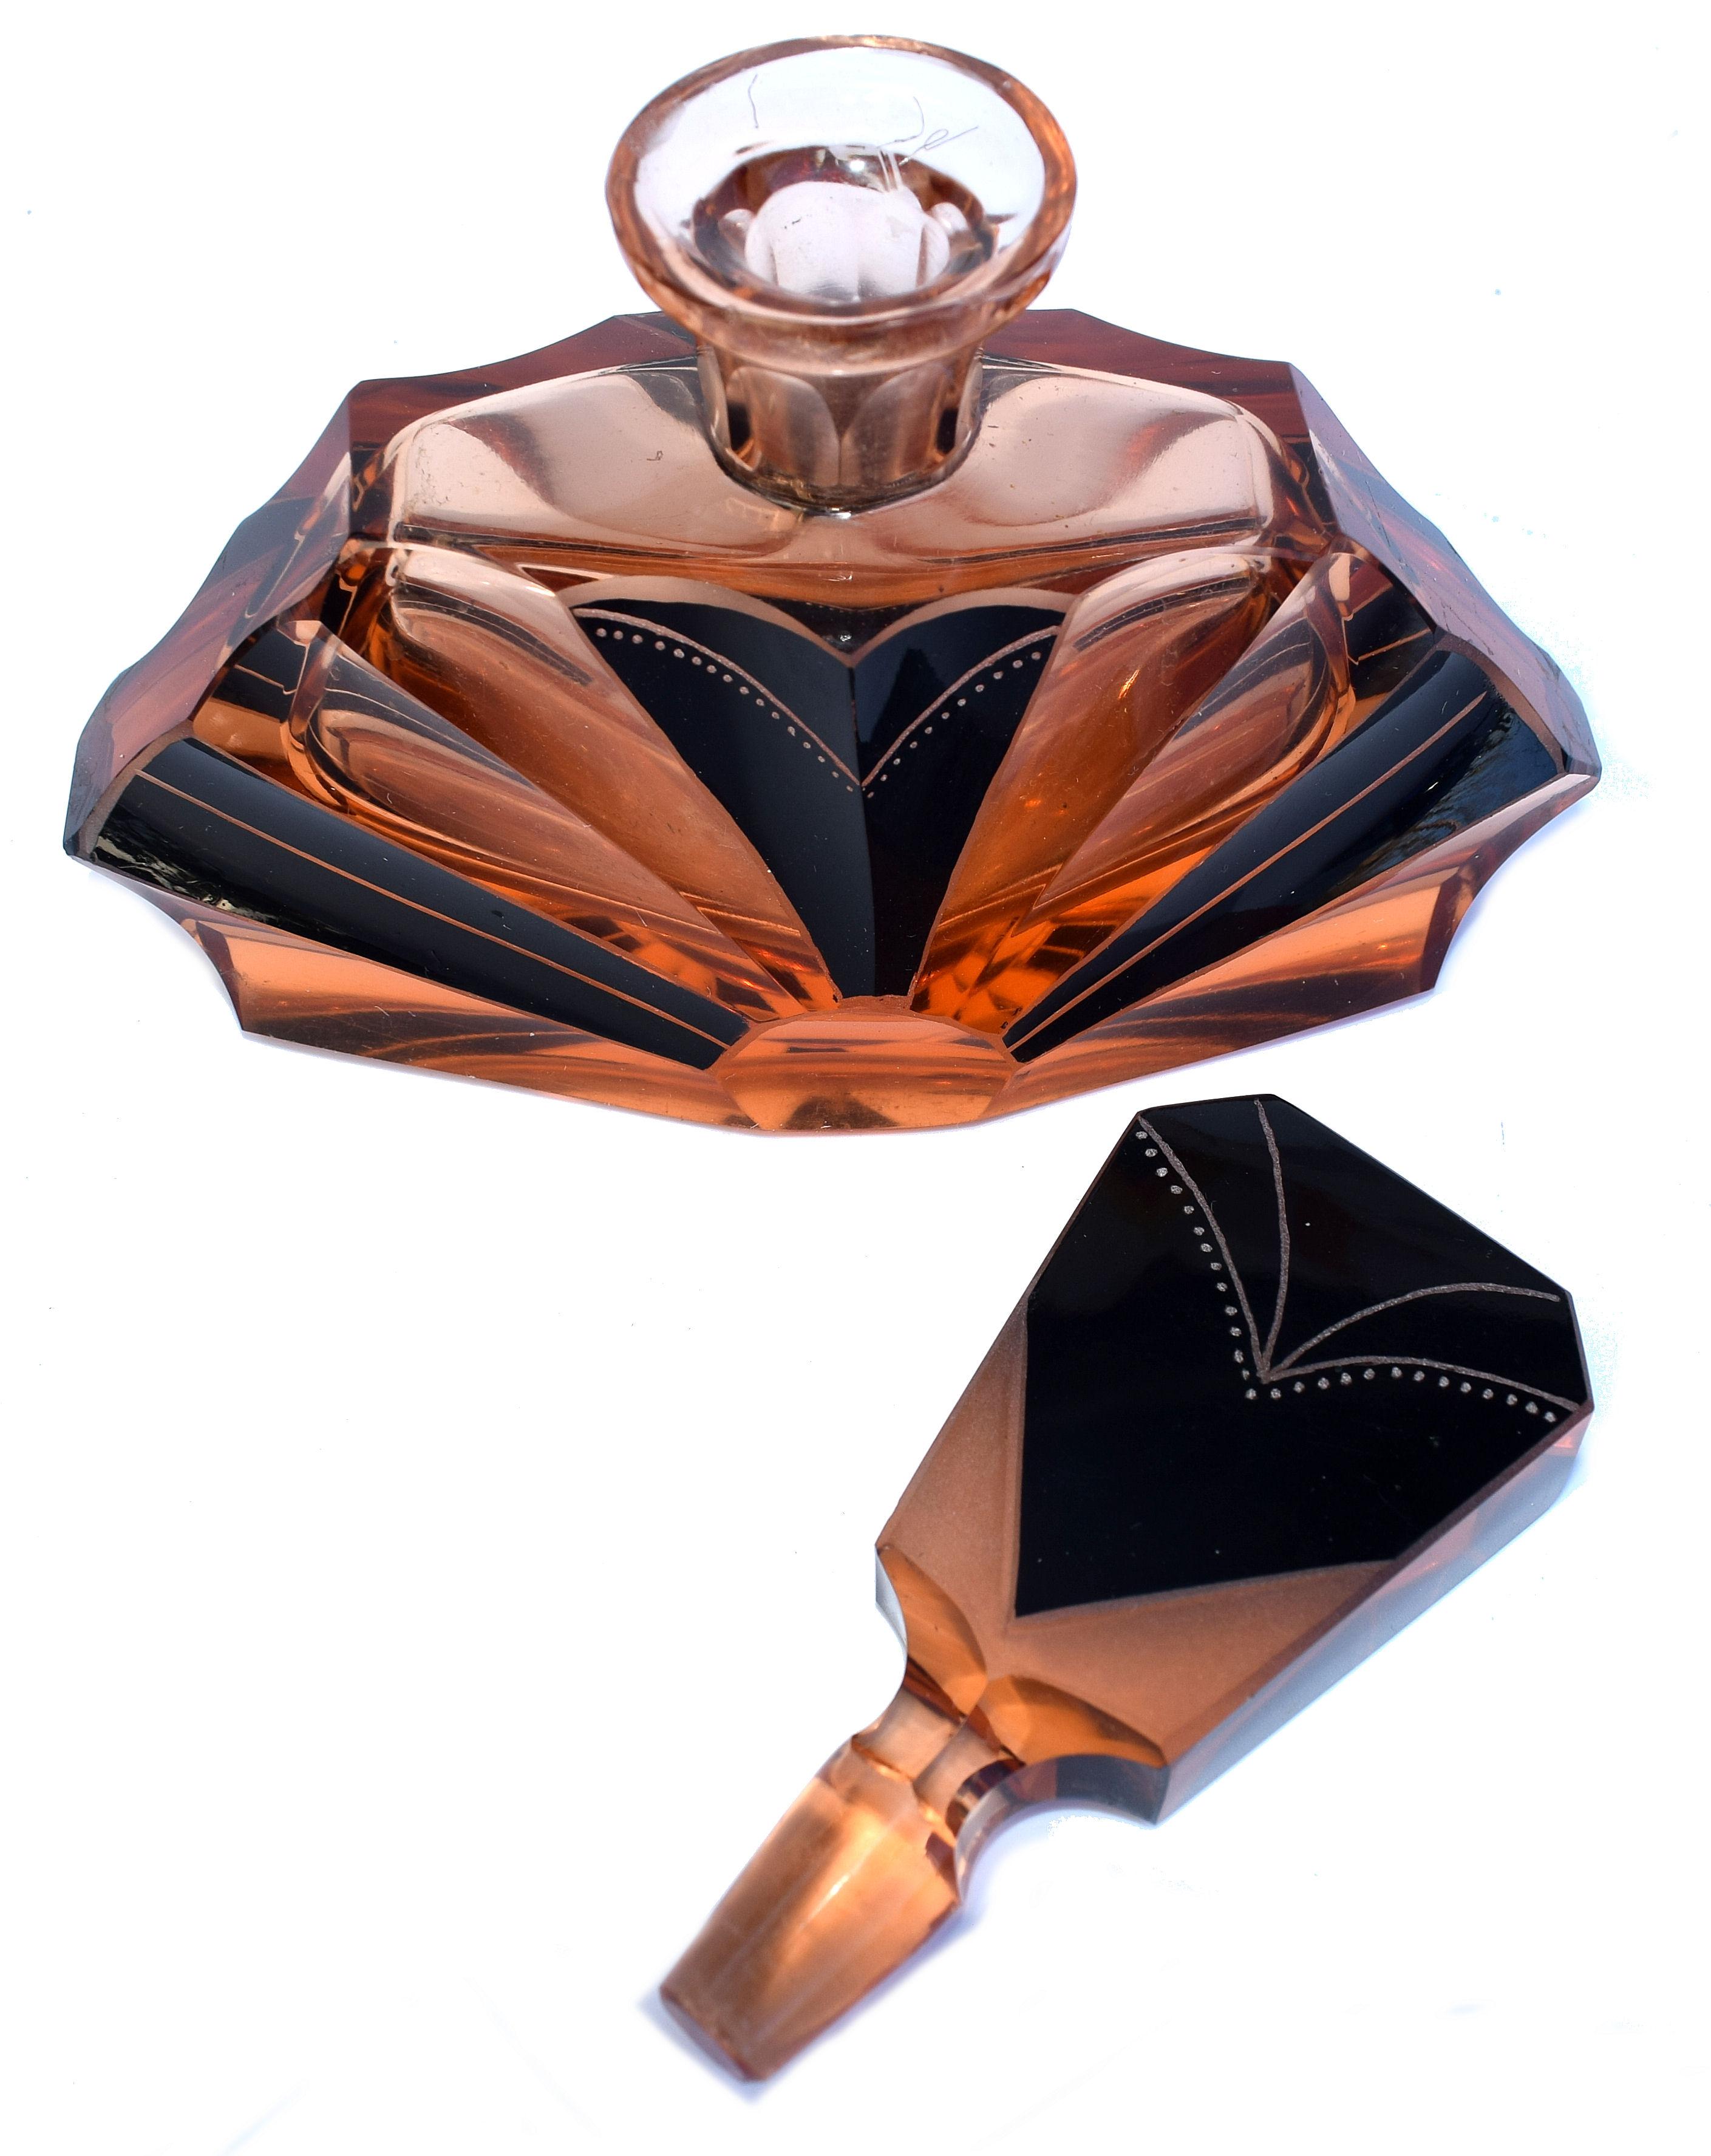 Czech Art Deco Amber Colored 1930s Glass Perfume Scent Bottle